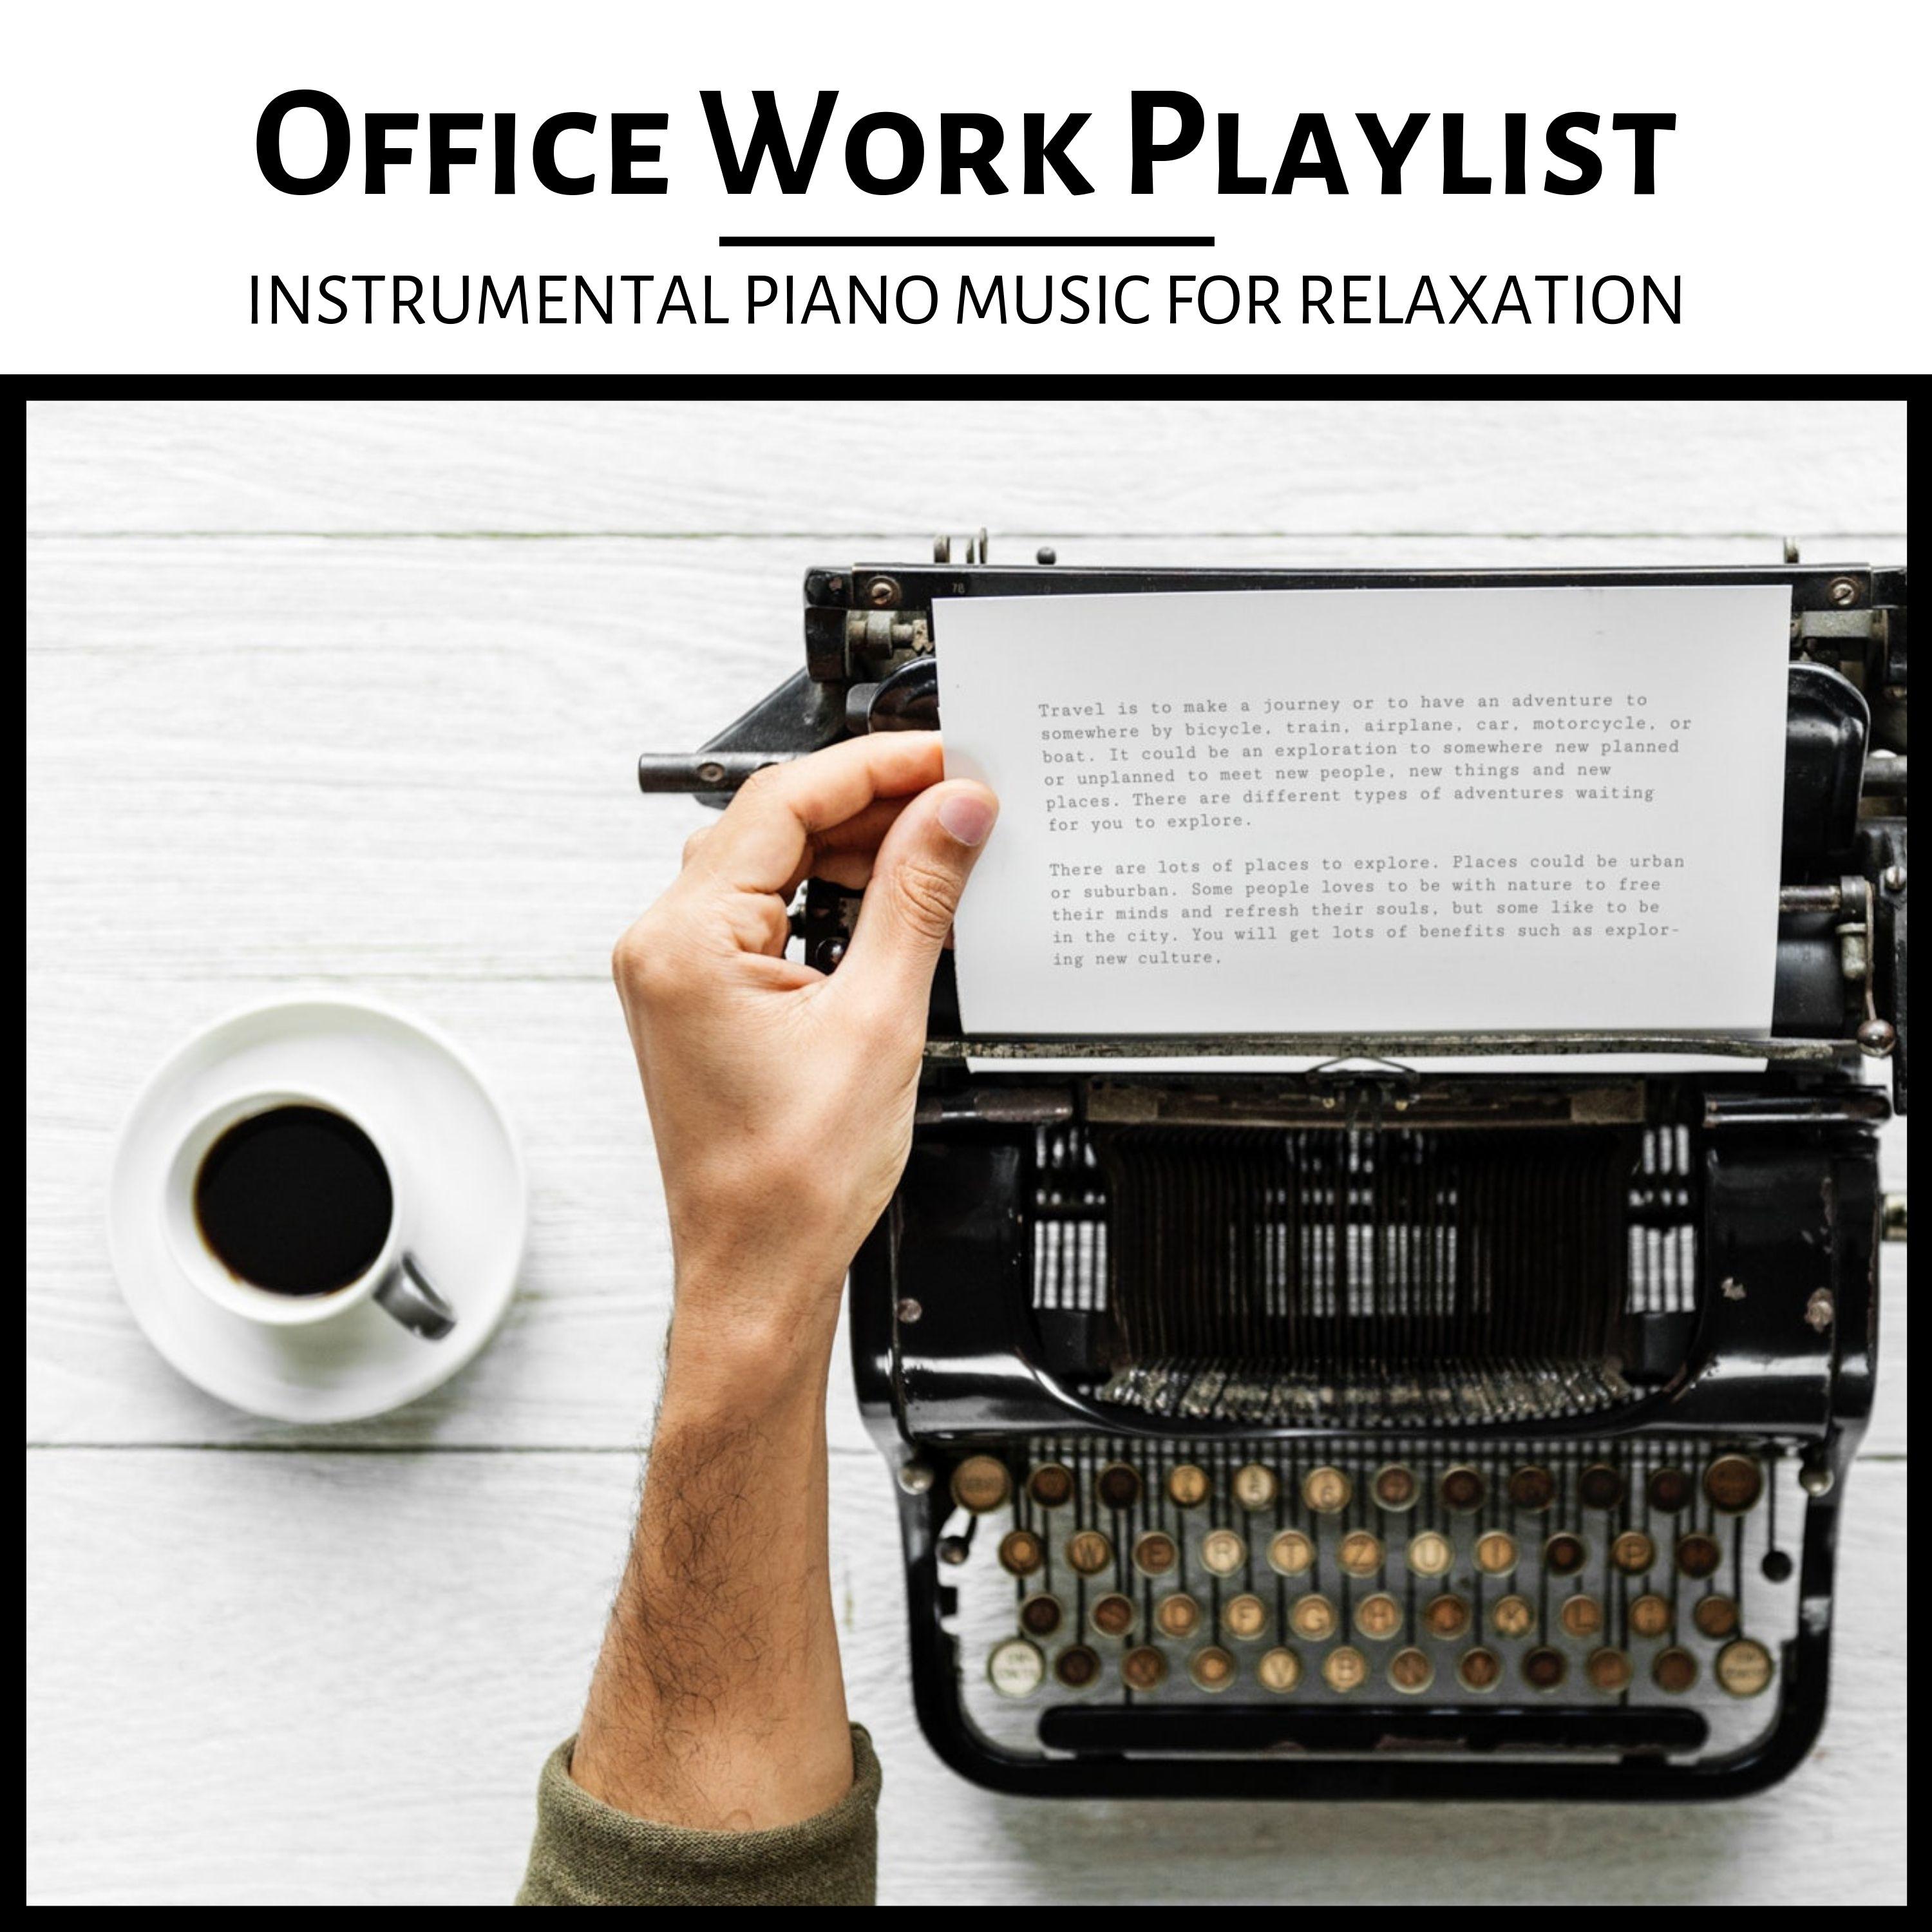 Office Work Playlist - Instrumental Piano Music for Relaxation